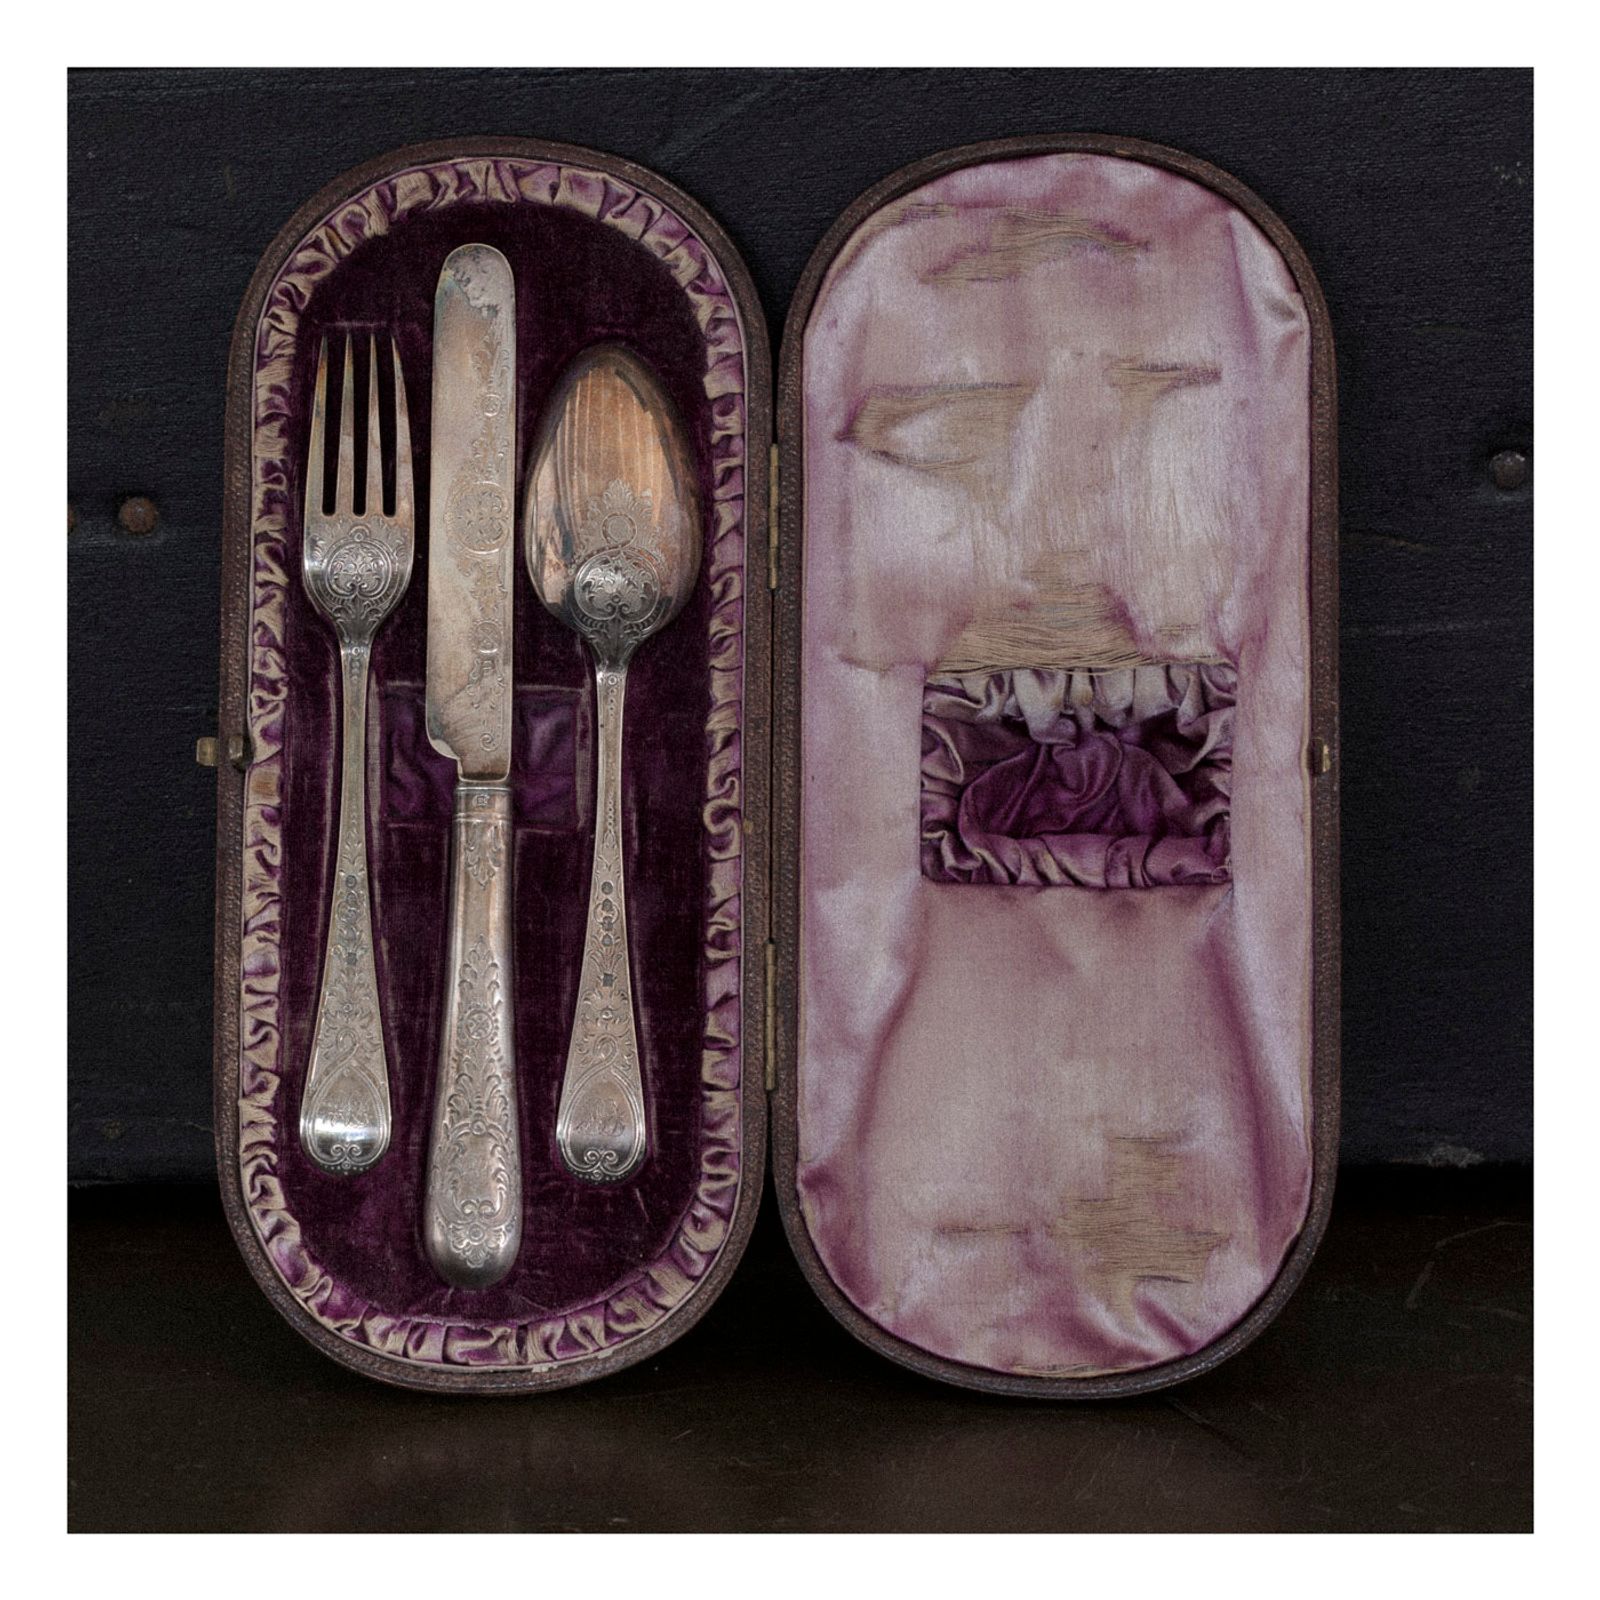 © Todd Bradley - Silverware set the Firths Gave my grandfather to bring home to his new baby girl.